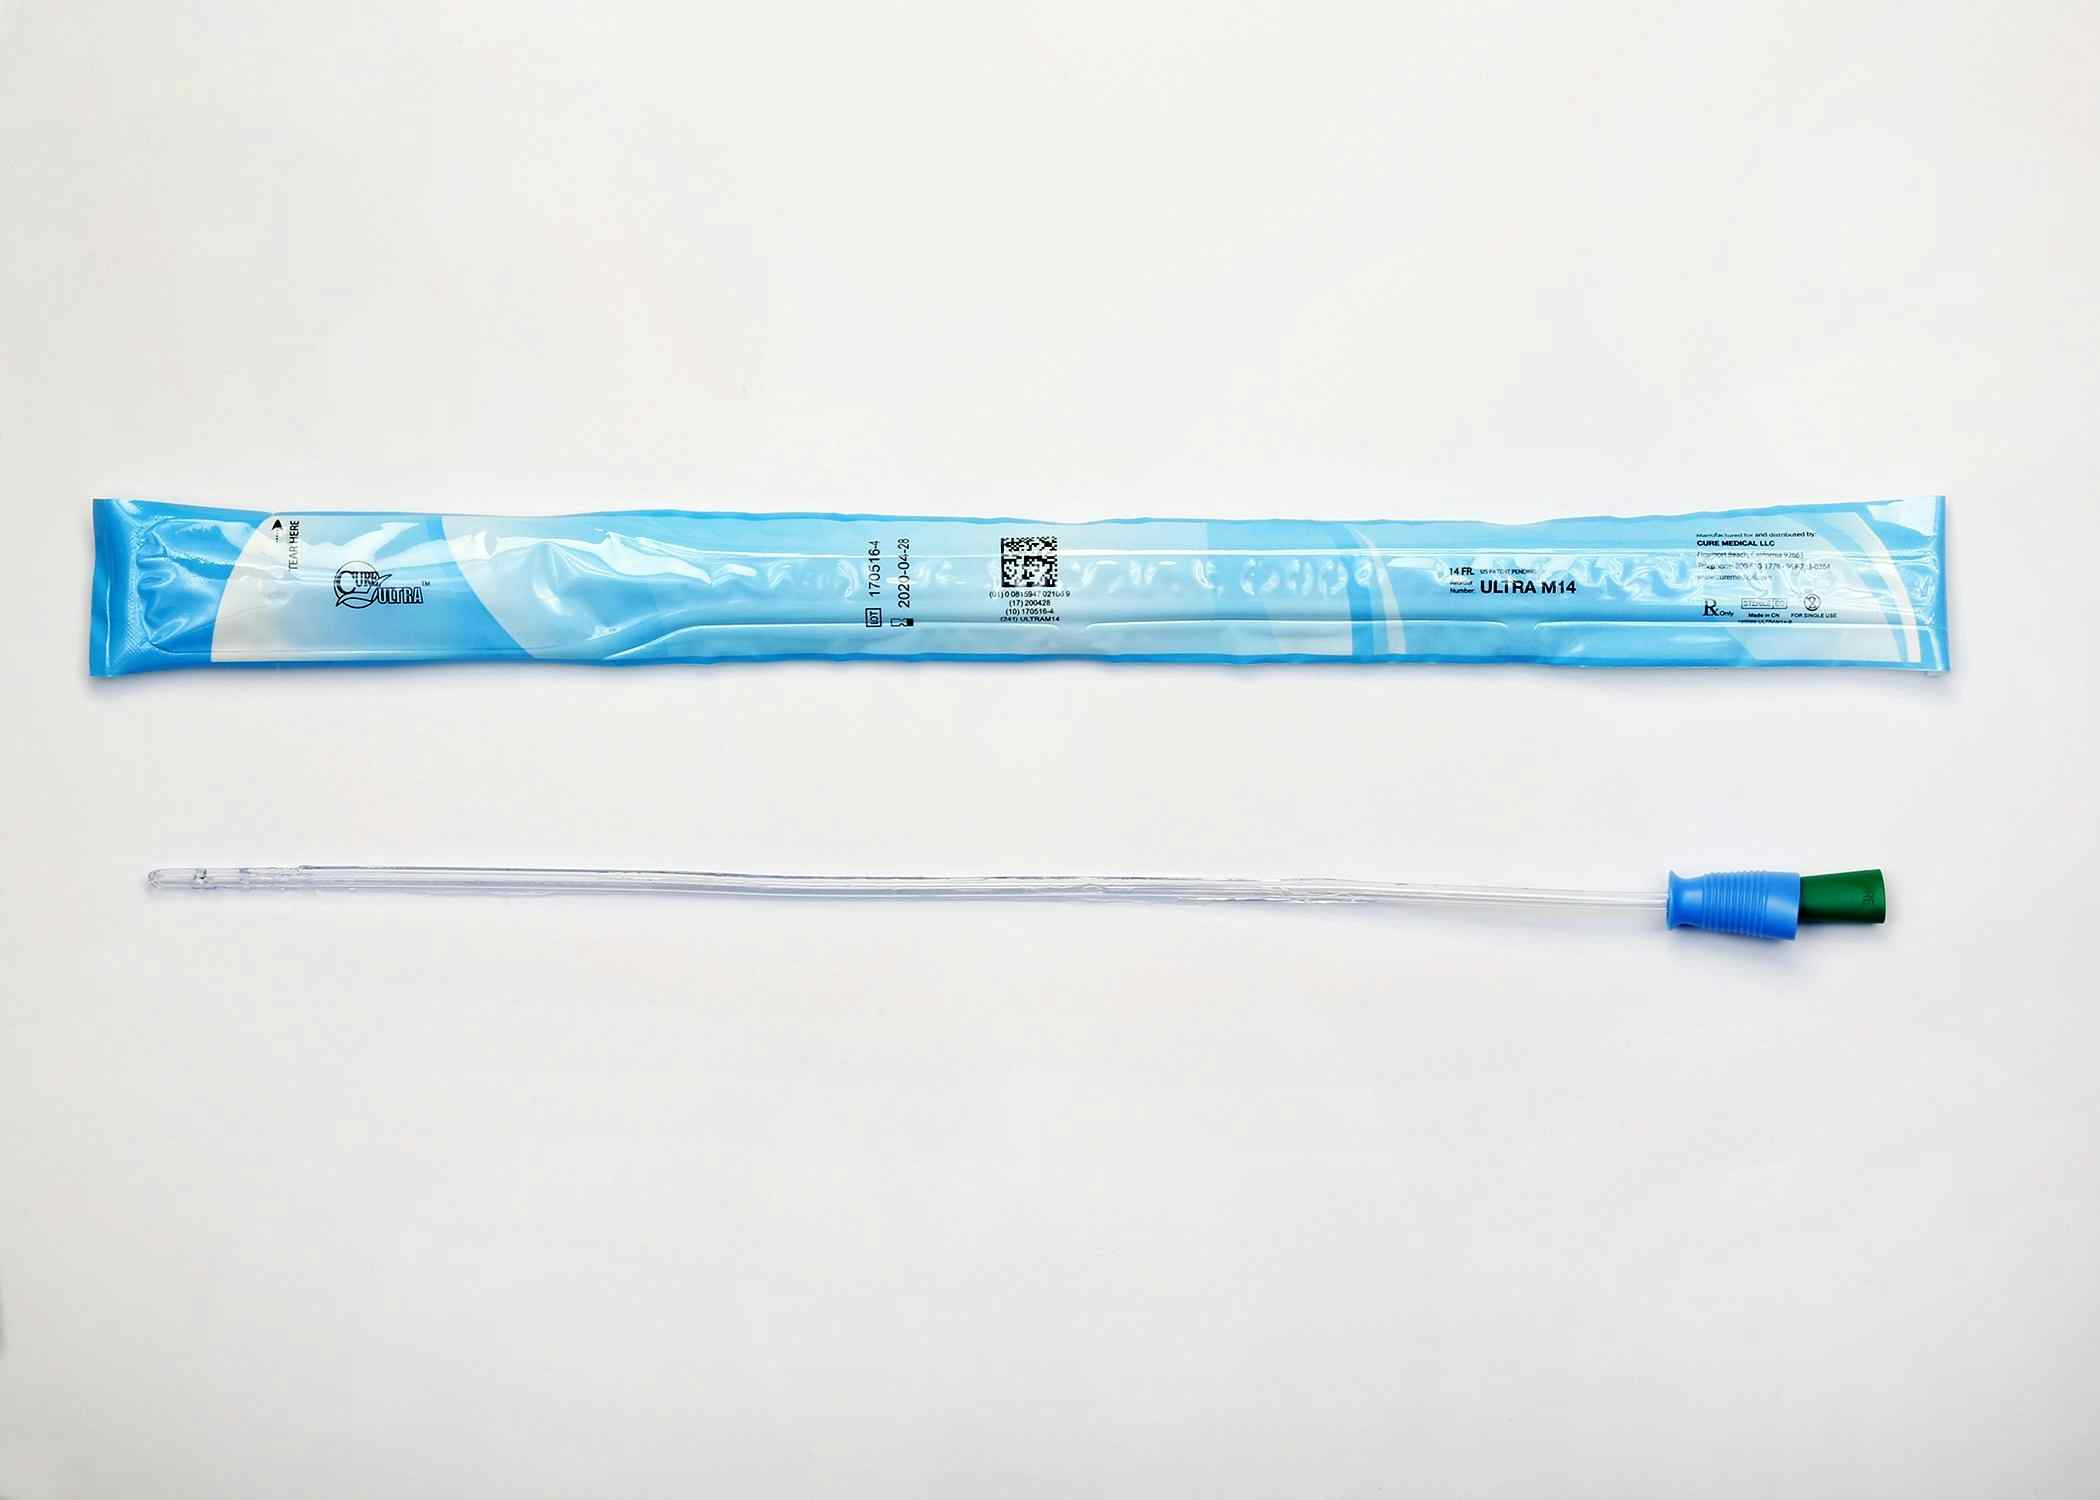 Cure Ultra Urethral Catheter, Male, Straight Tip, Lubricated PVC, 16", ULTRAM14, 14 Fr. - Box of 30